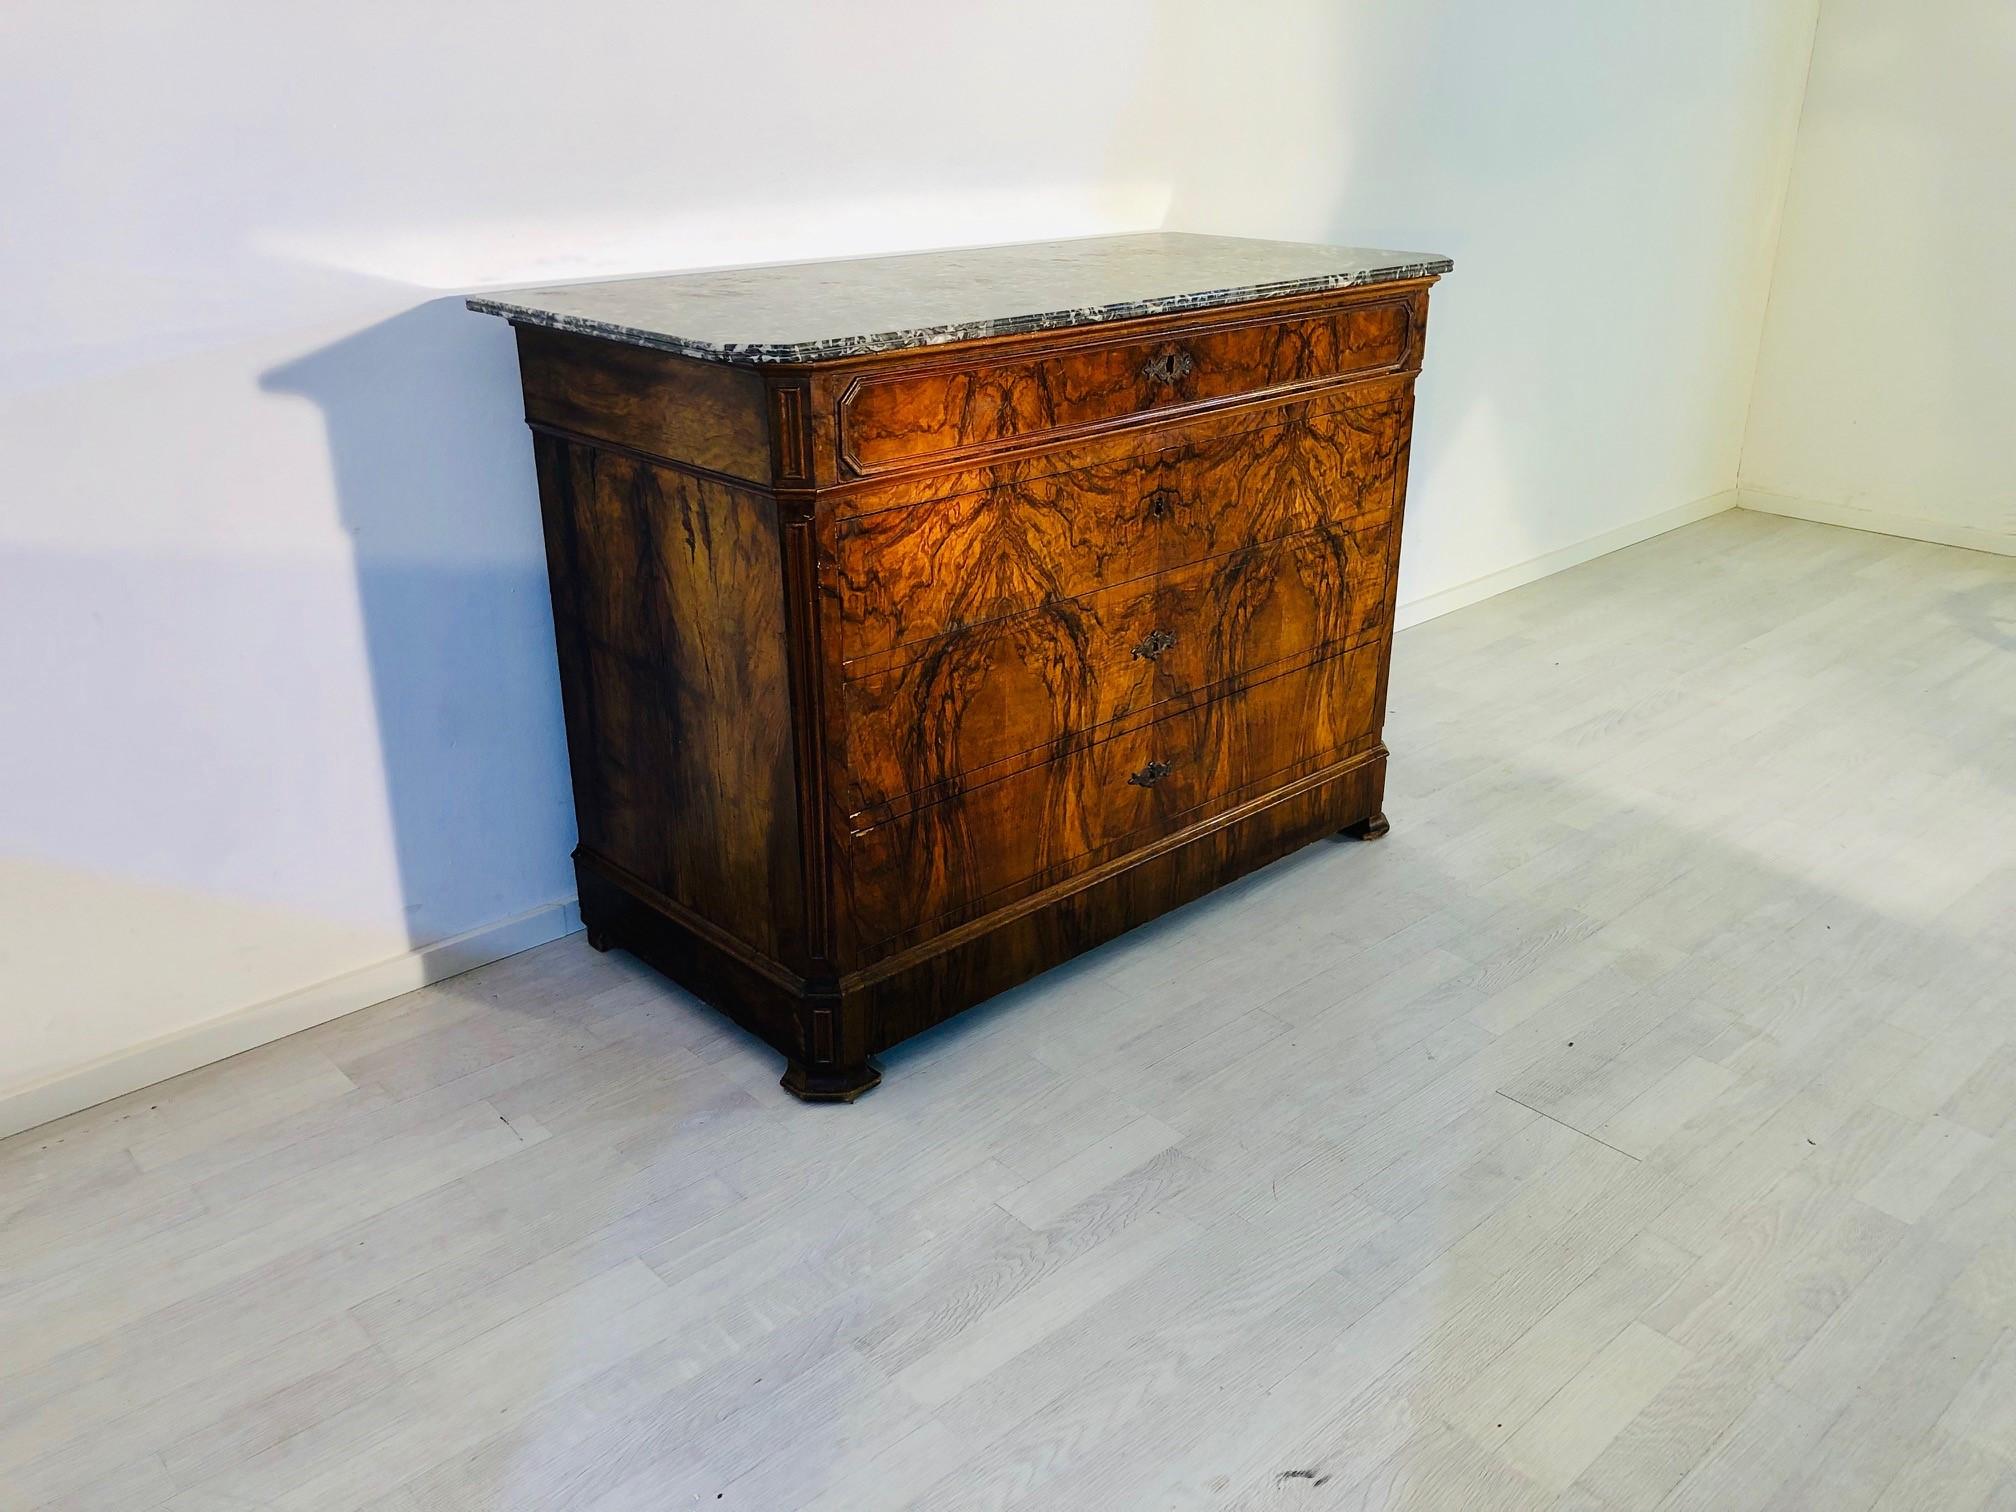 Luxurious Biedermeier era chest of drawers or commode with a medium brown and wonderfully colored walnut wood and original marble top! A stunning, eyecatching piece with a carfully selected veneer picture which extends over all four drawers. Offer